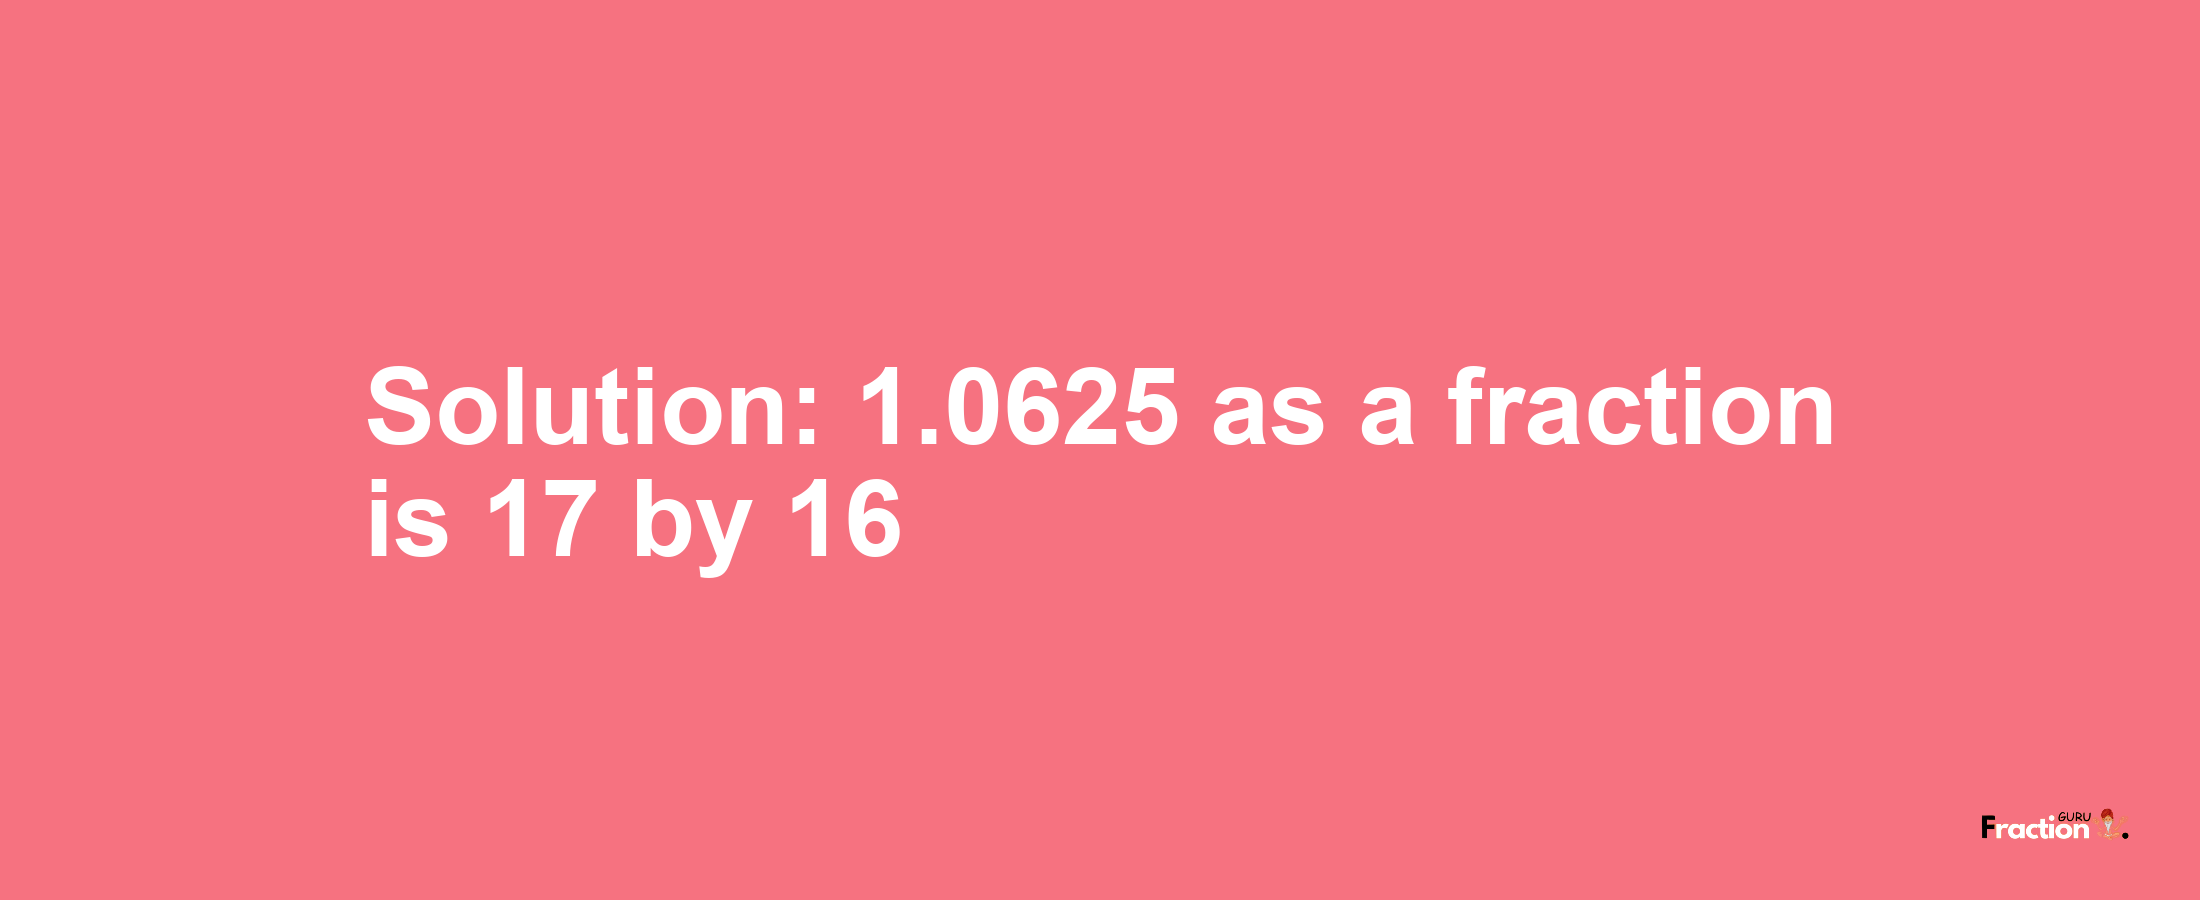 Solution:1.0625 as a fraction is 17/16